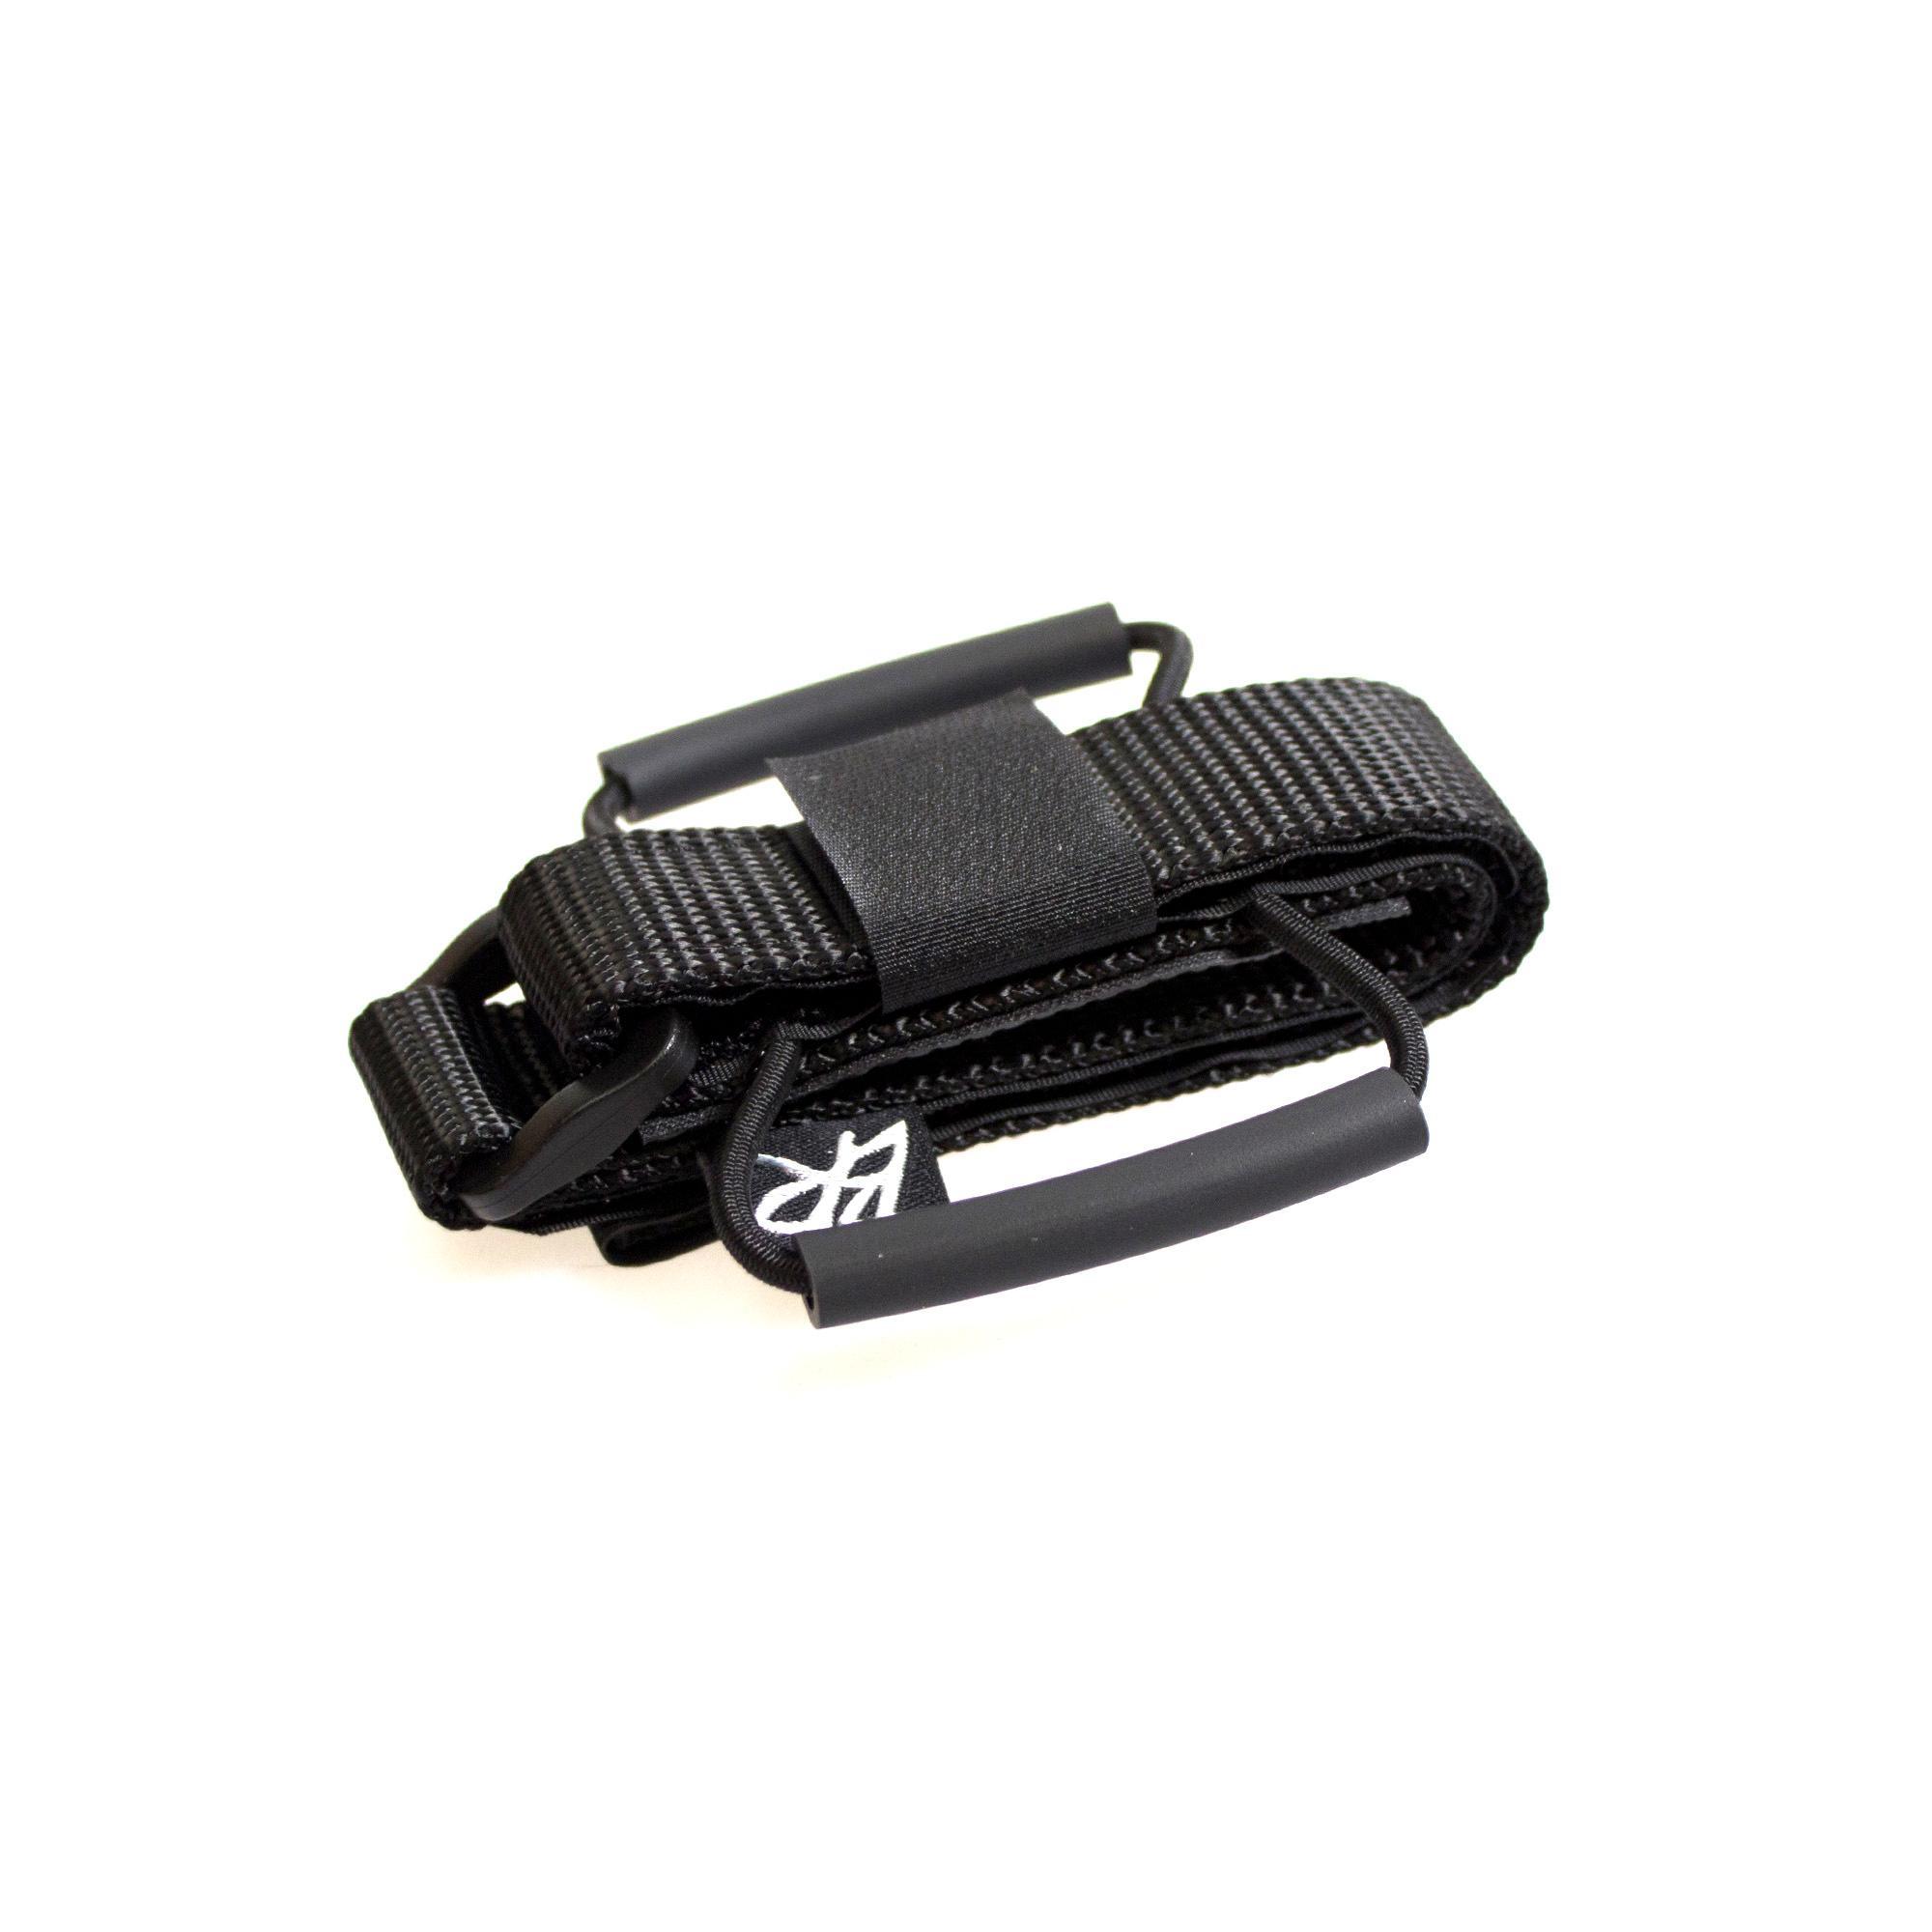 Back country research race strap in black for mtb frames